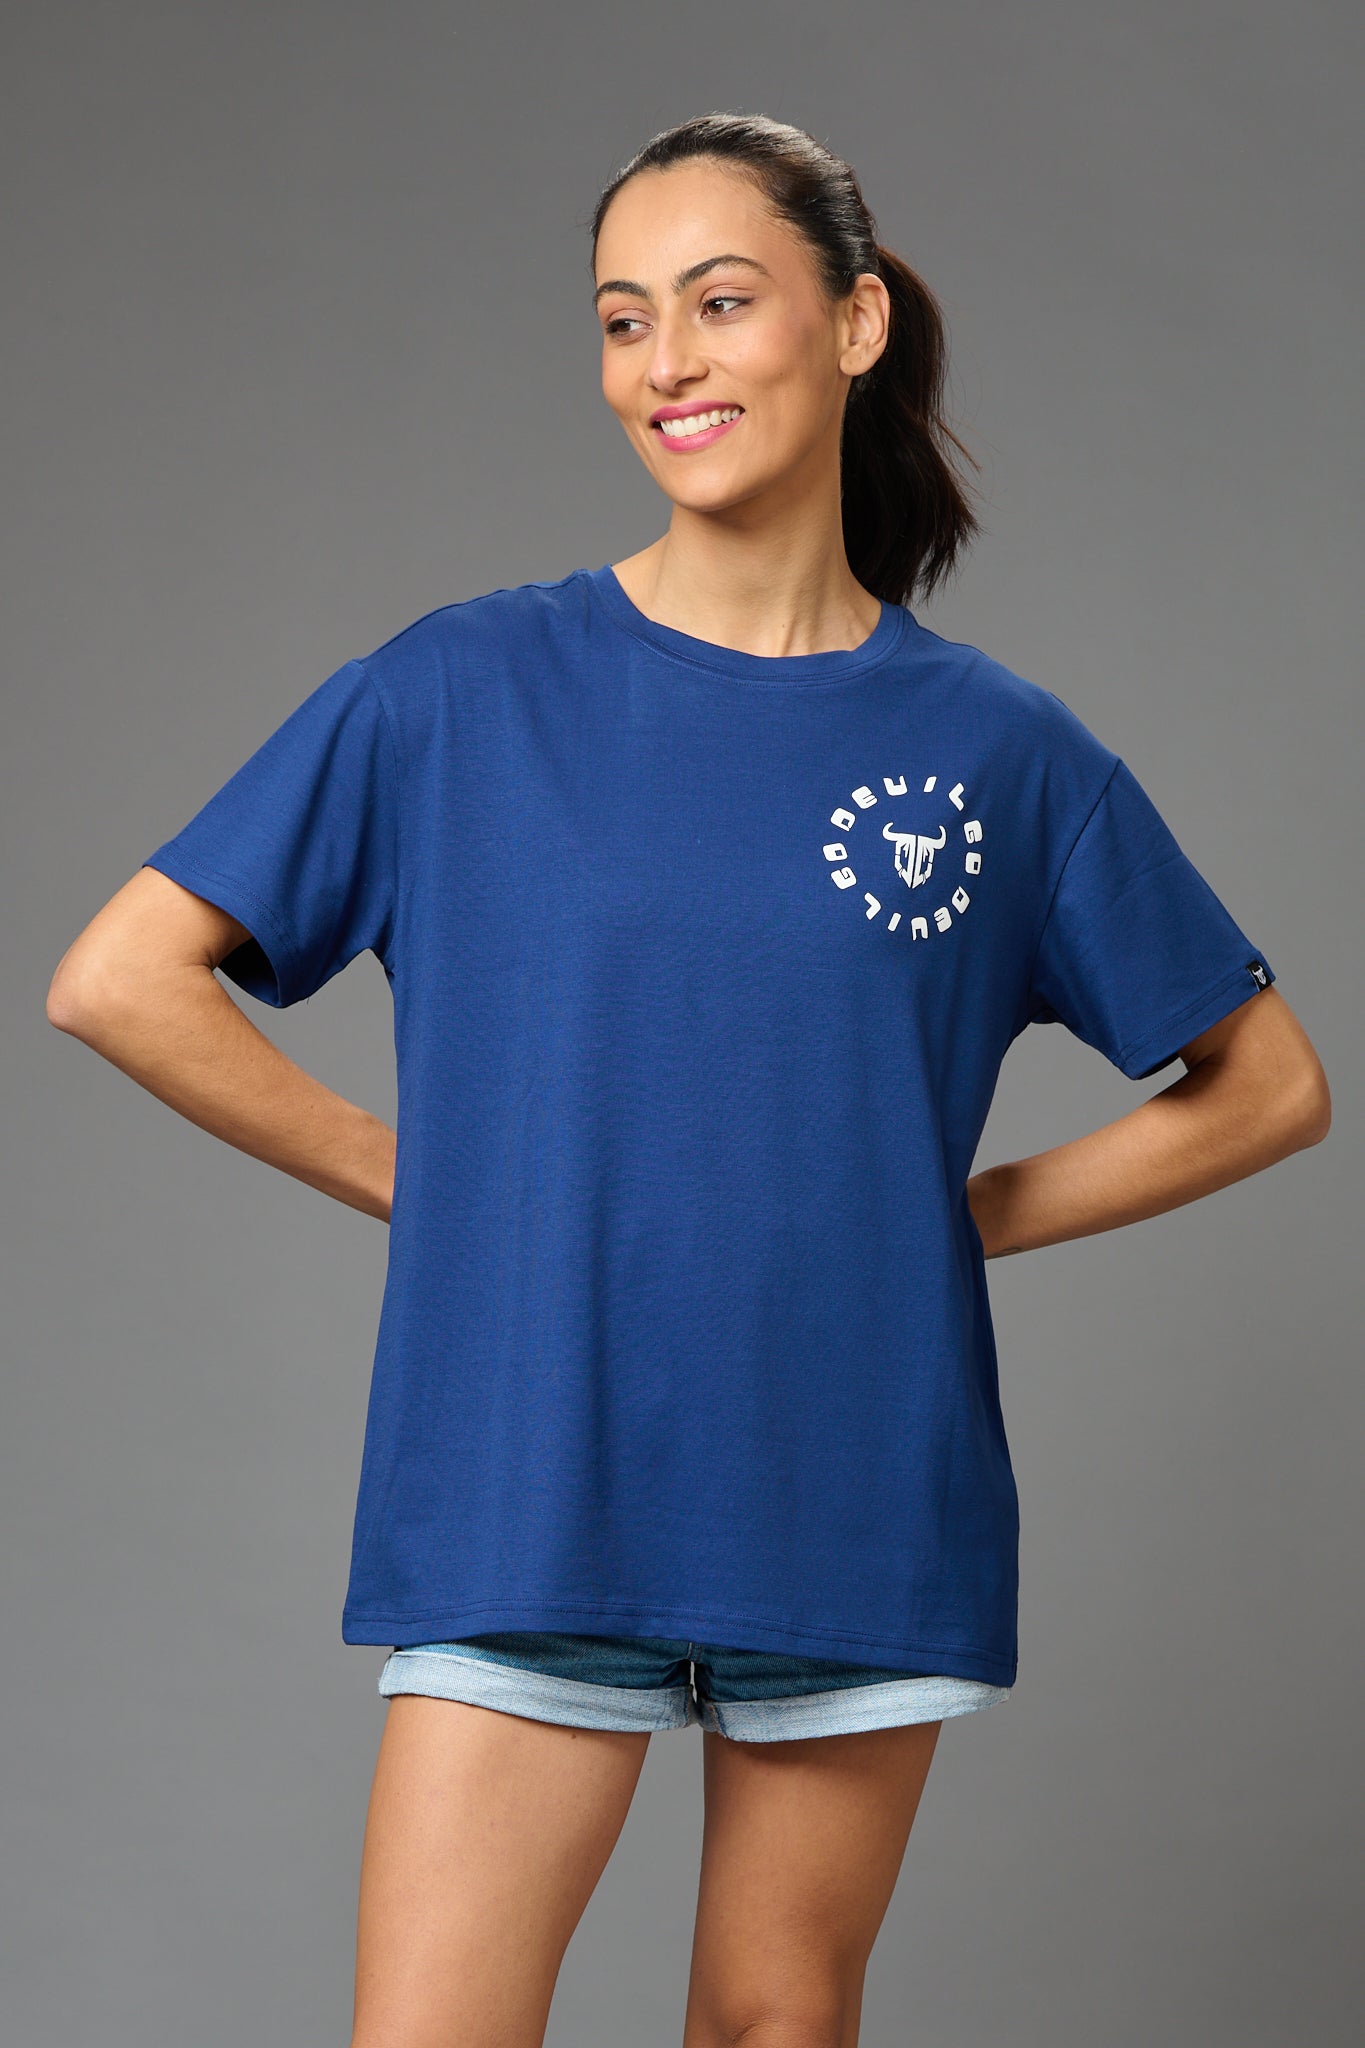 You are Always Loved Printed Blue Oversized T-Shirt for Women - Go Devil